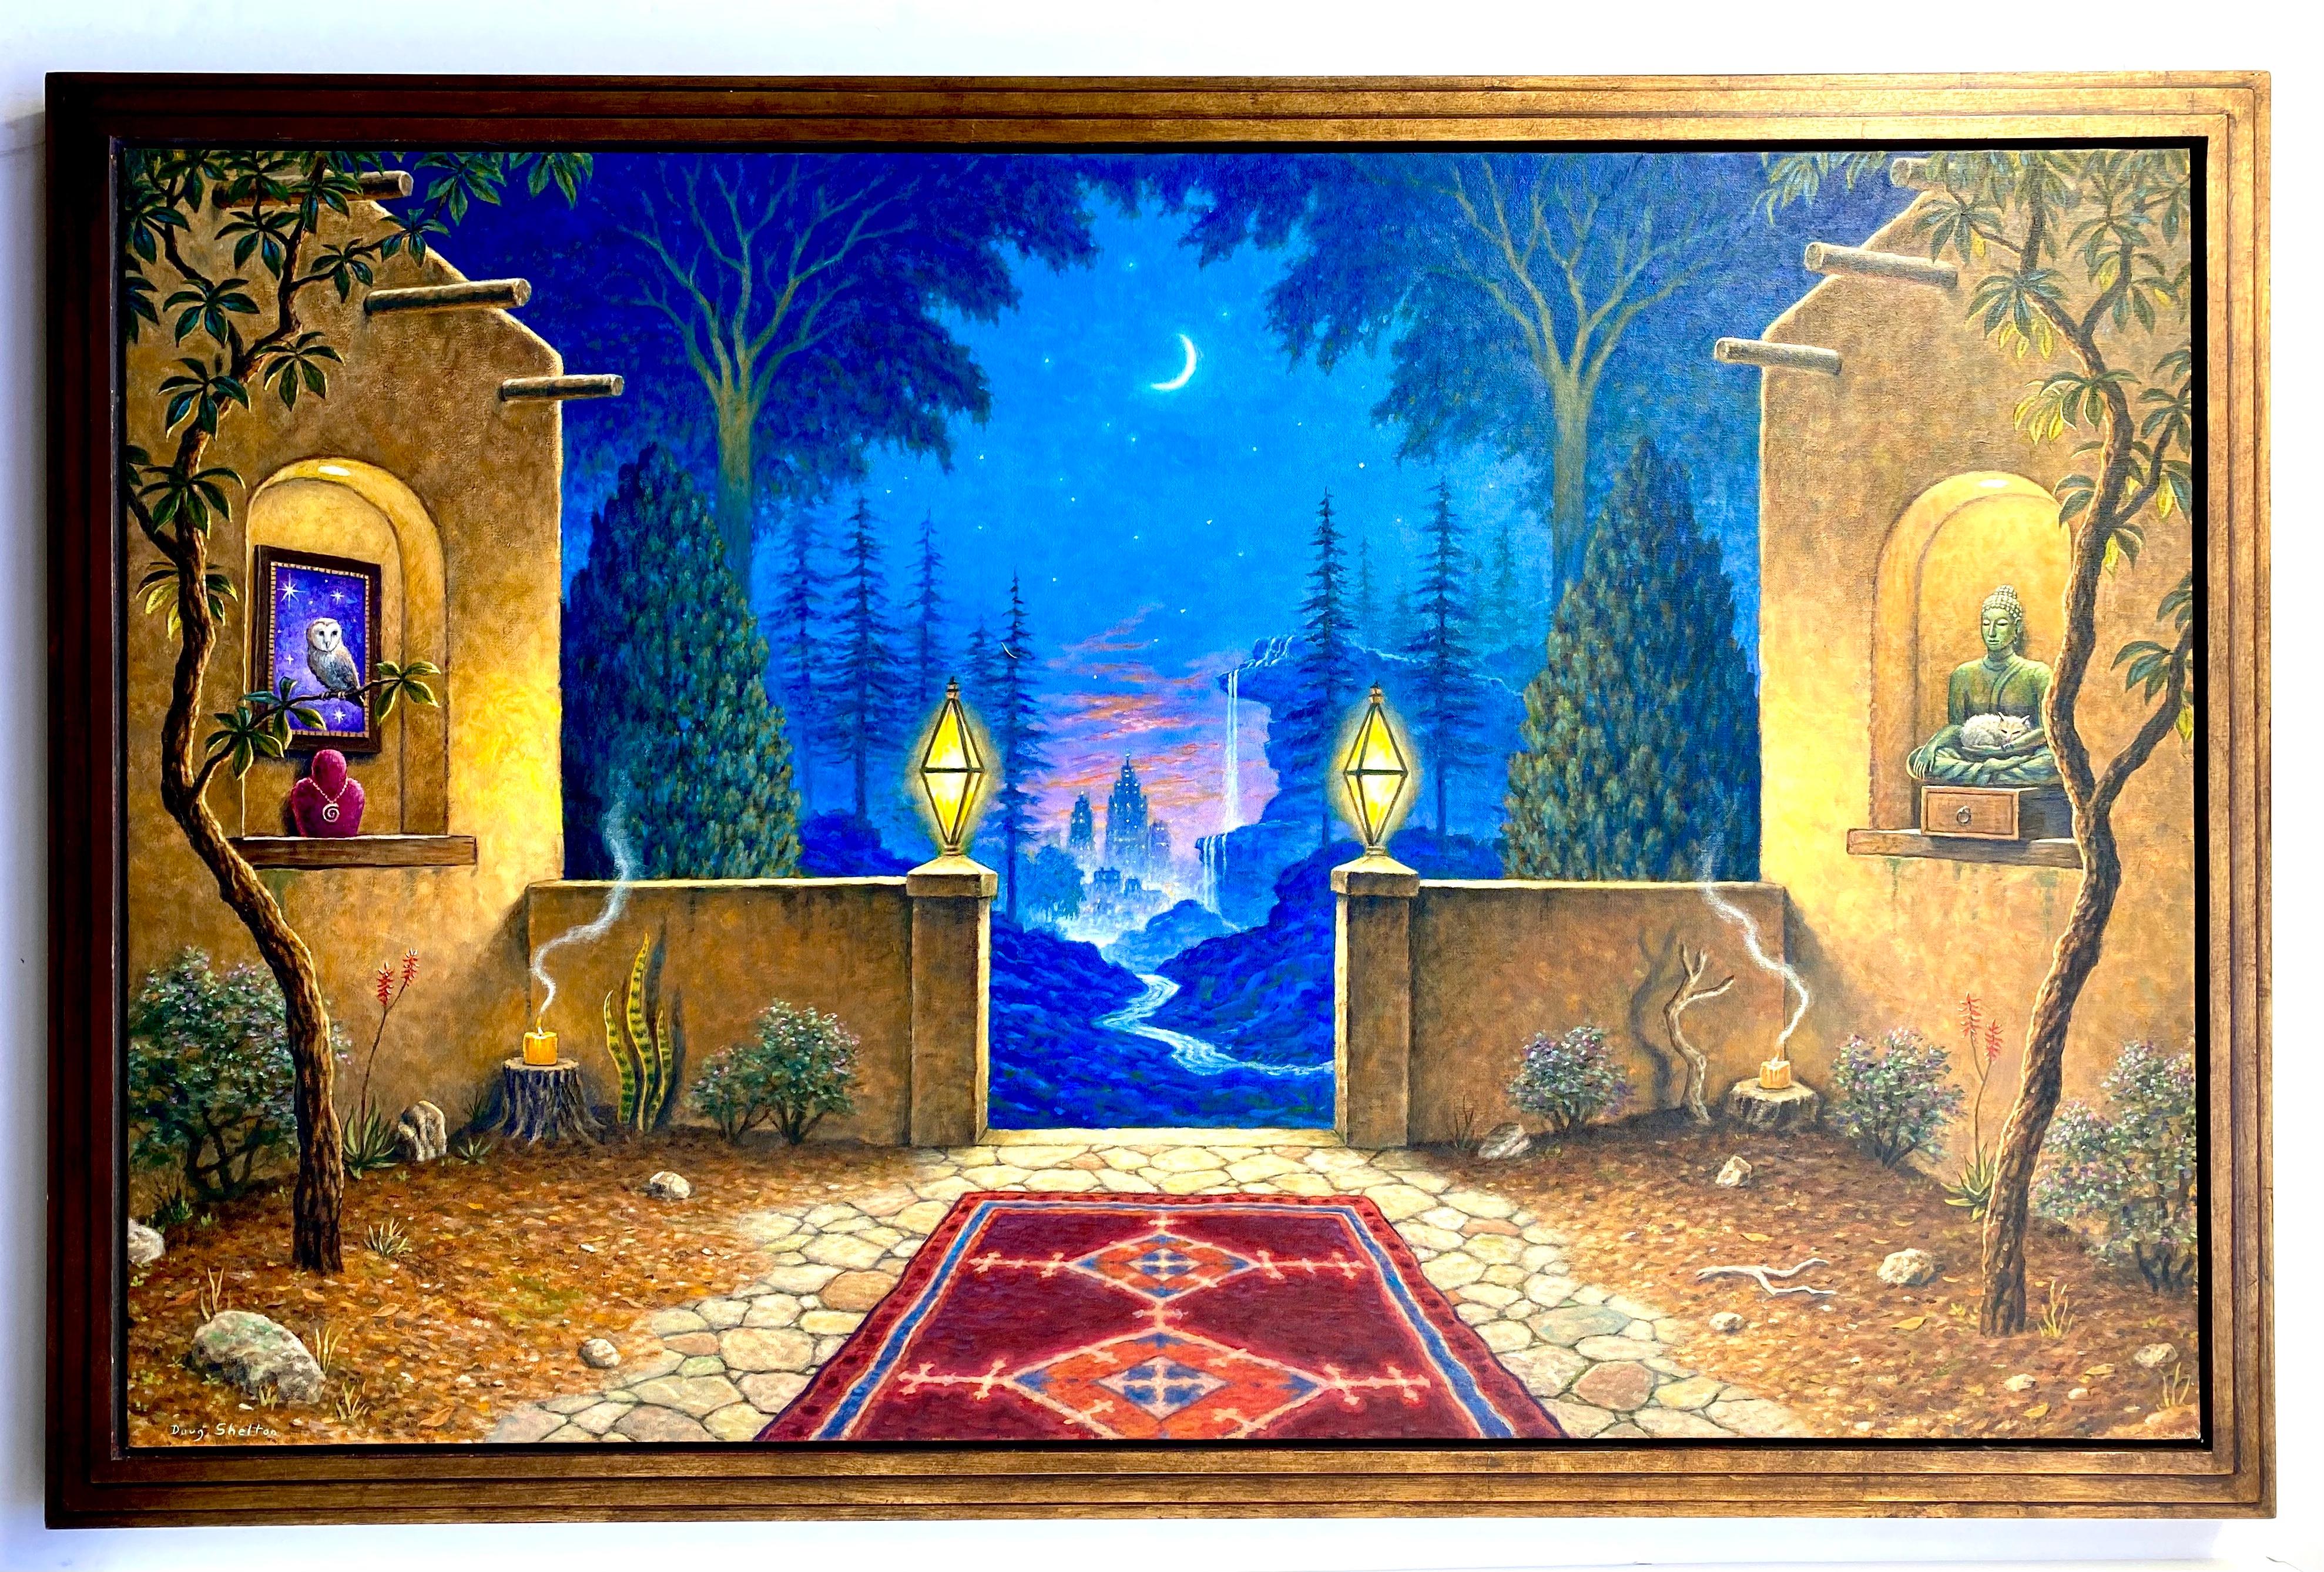 The patio of a home glows gold under the moonlight. The architecture and adornments of the building feel fantasy-esque. The background is a large forest, painted in a vivid blue, revealing the silhouette of a distant city in the distance. A red rug